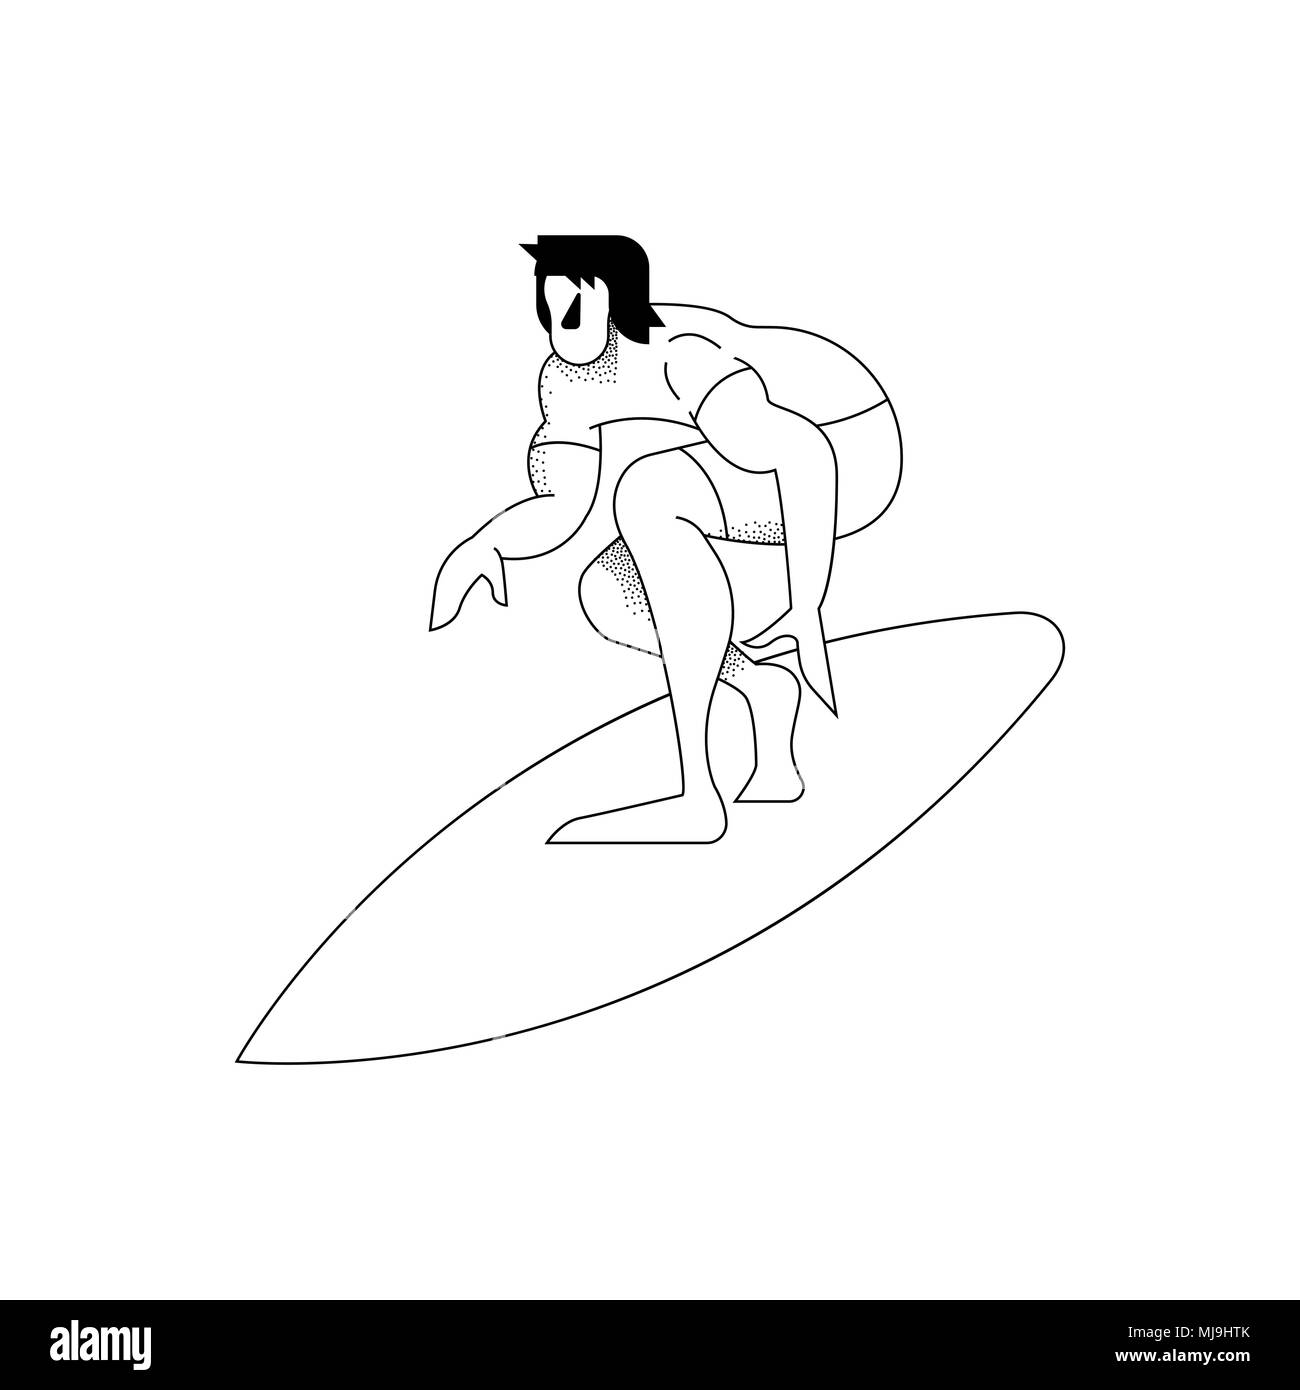 Man surfing, modern black and white outline style. Surfer barreling pose in action over isolated background. EPS10 vector. Stock Vector